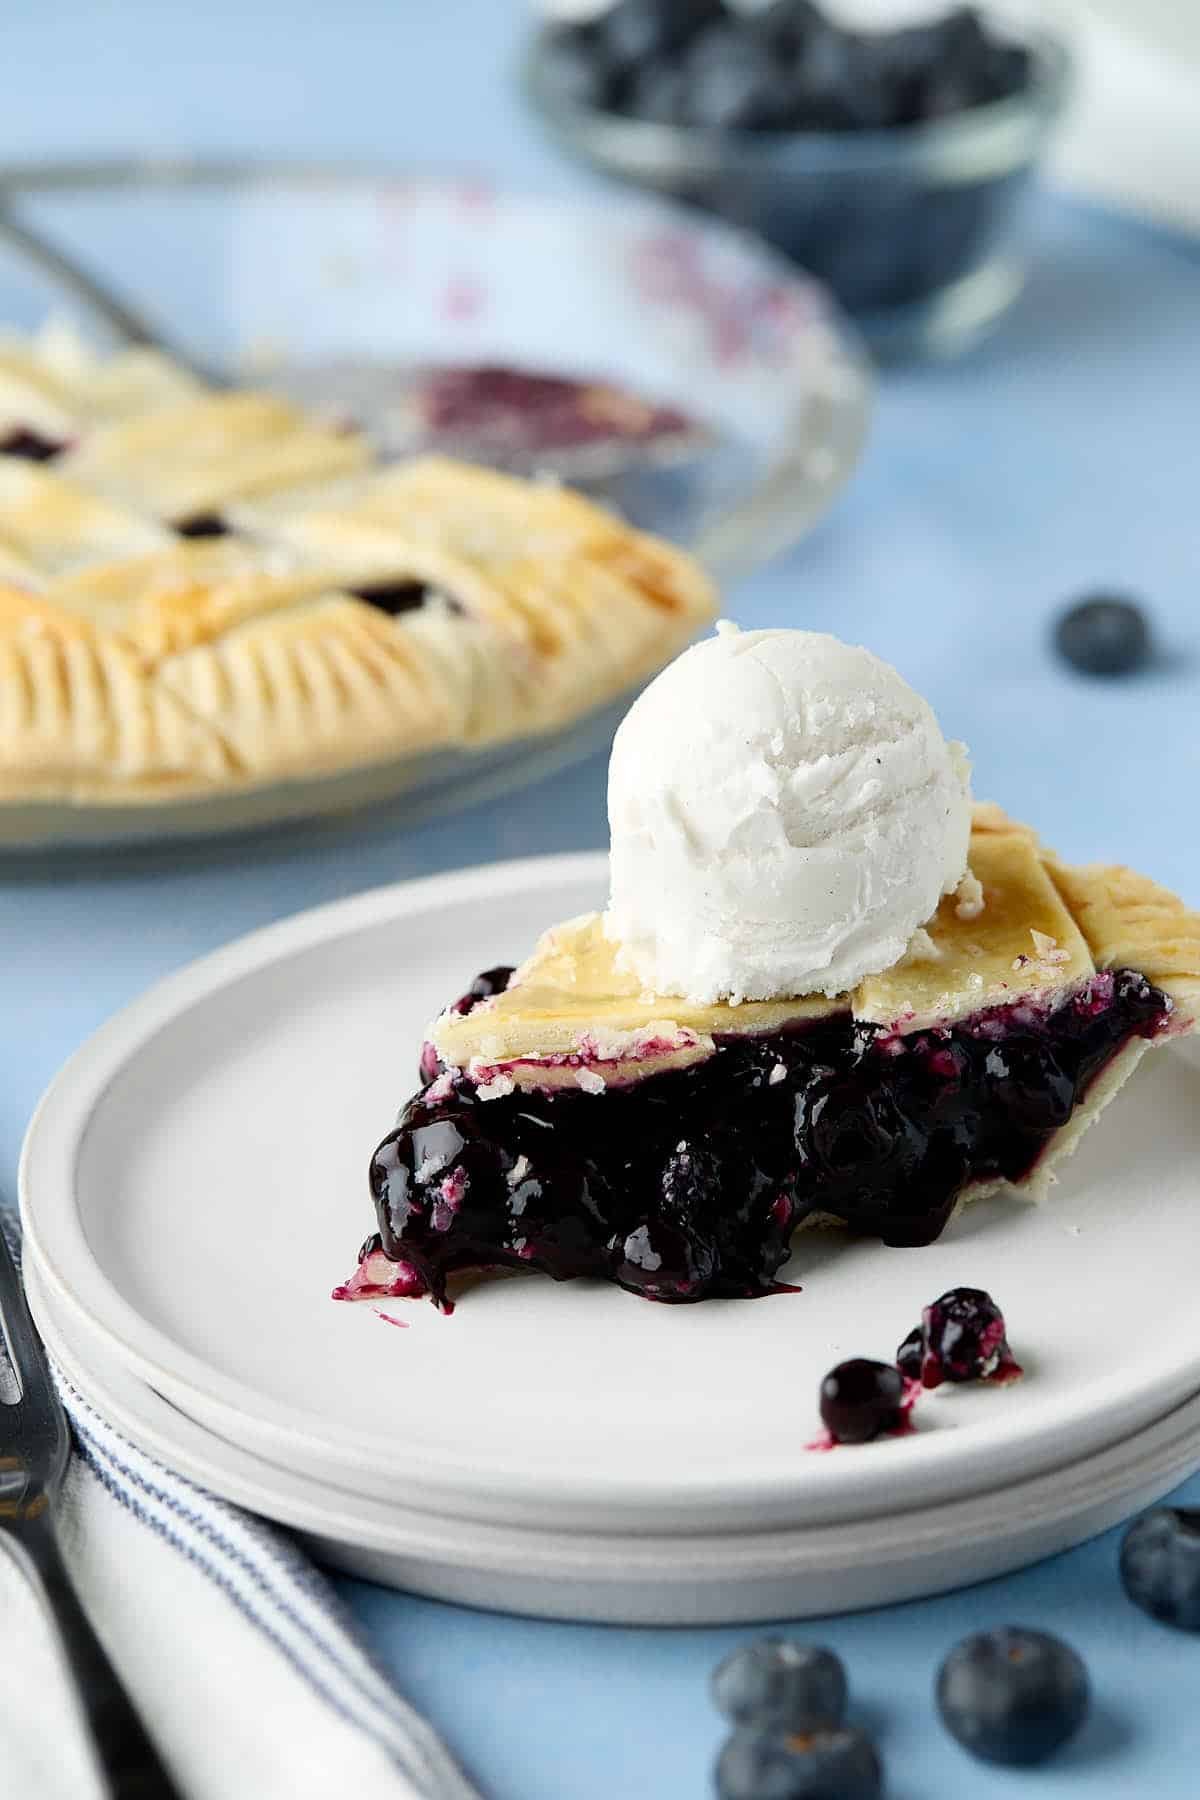 A plate with a slice of blueberry pie with a scoop of ice cream on top.